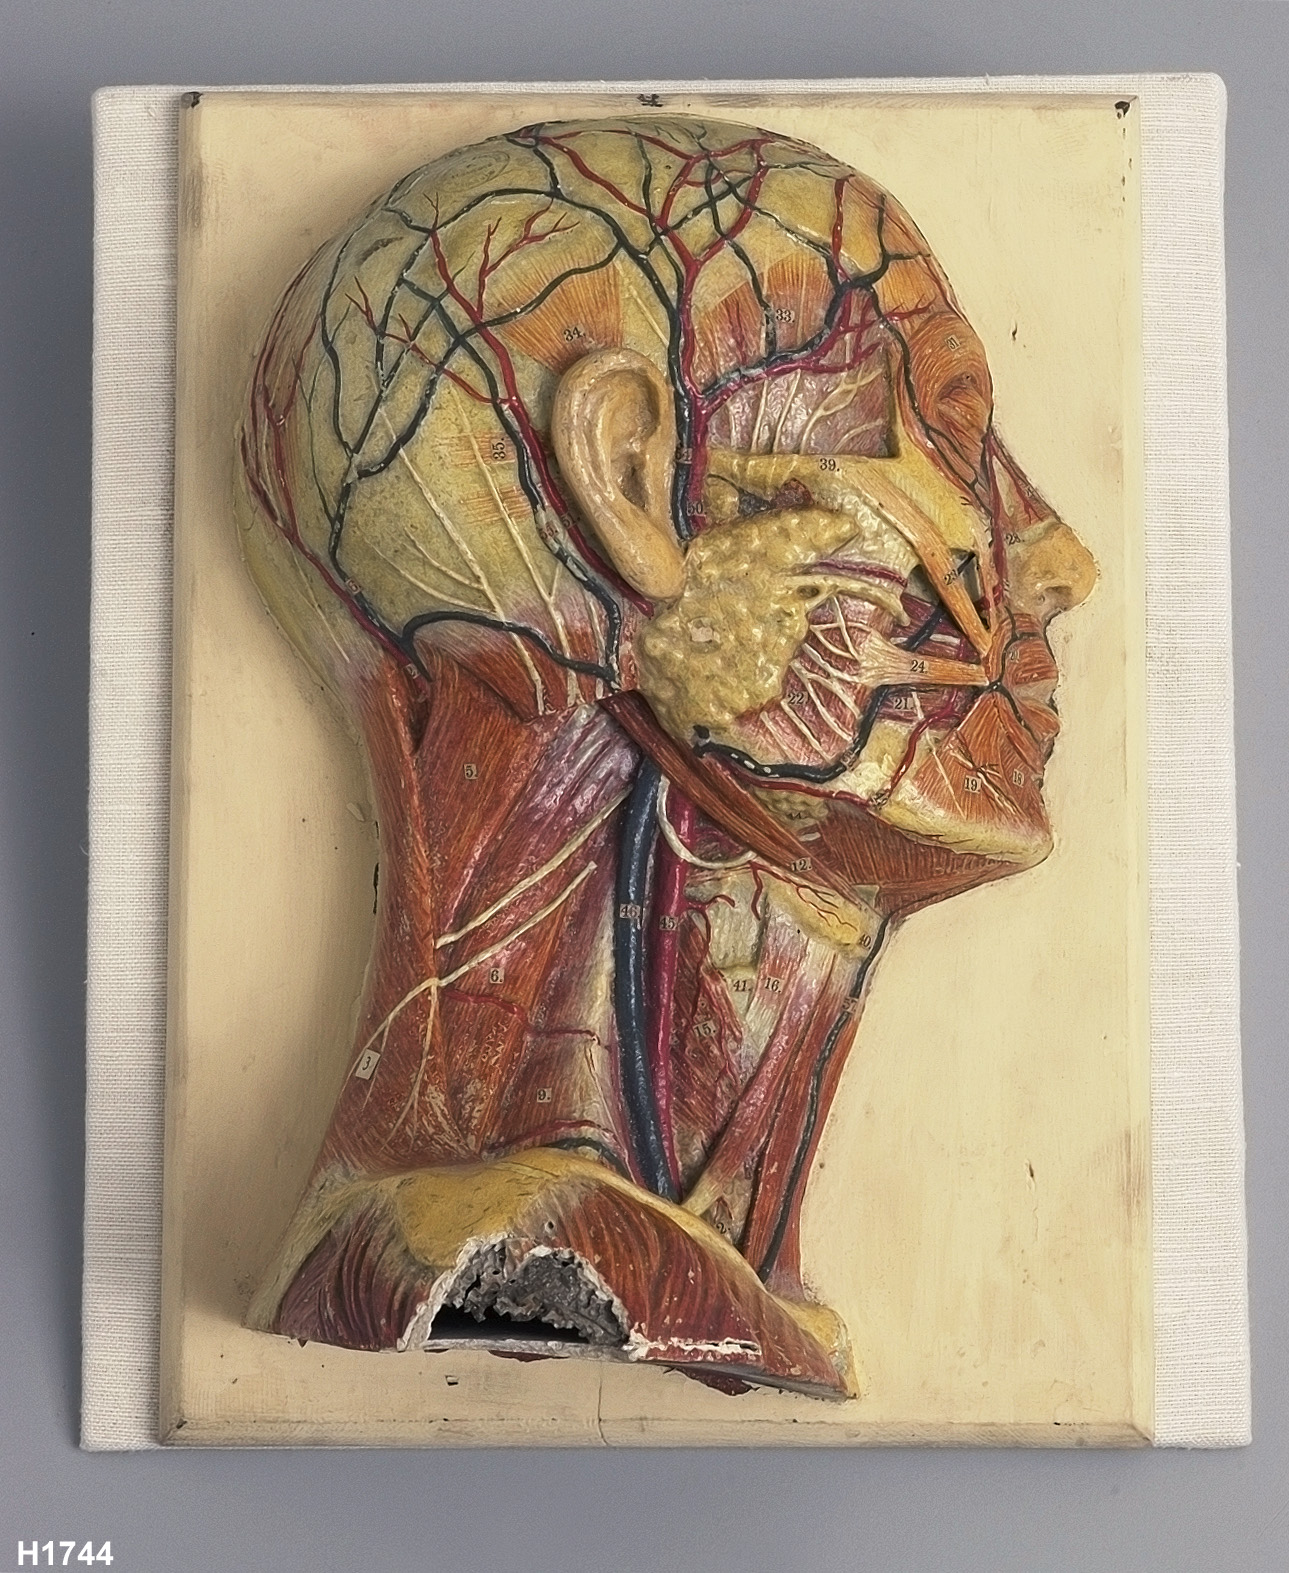 Anatomical model of a human head showing vascular and muscle system